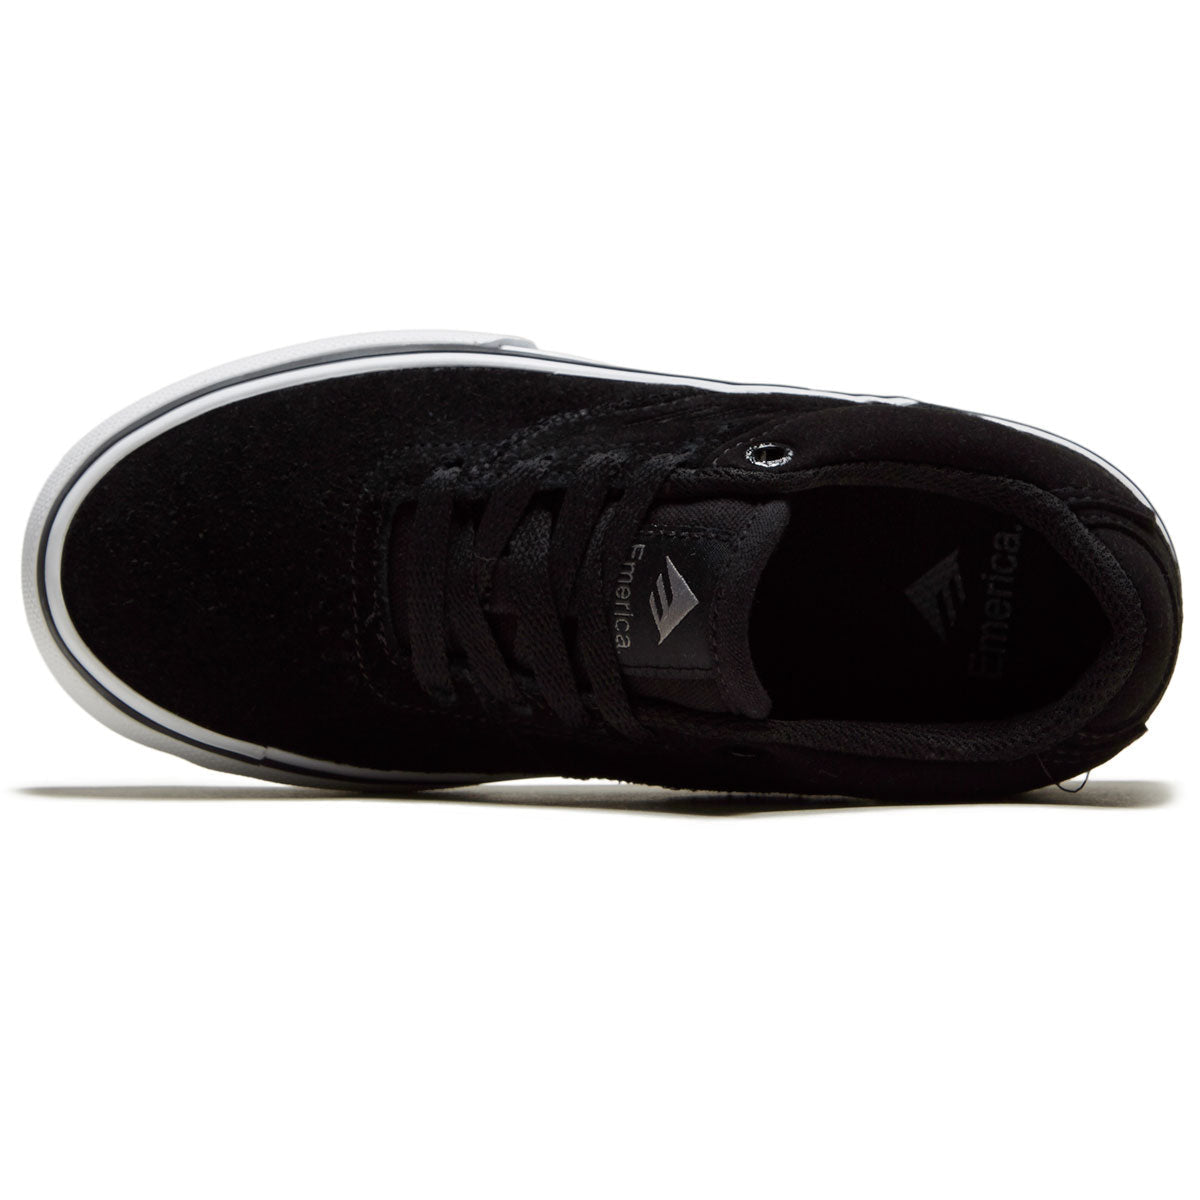 Emerica Youth The Low Vulc Shoes - Black/White/Gum image 3